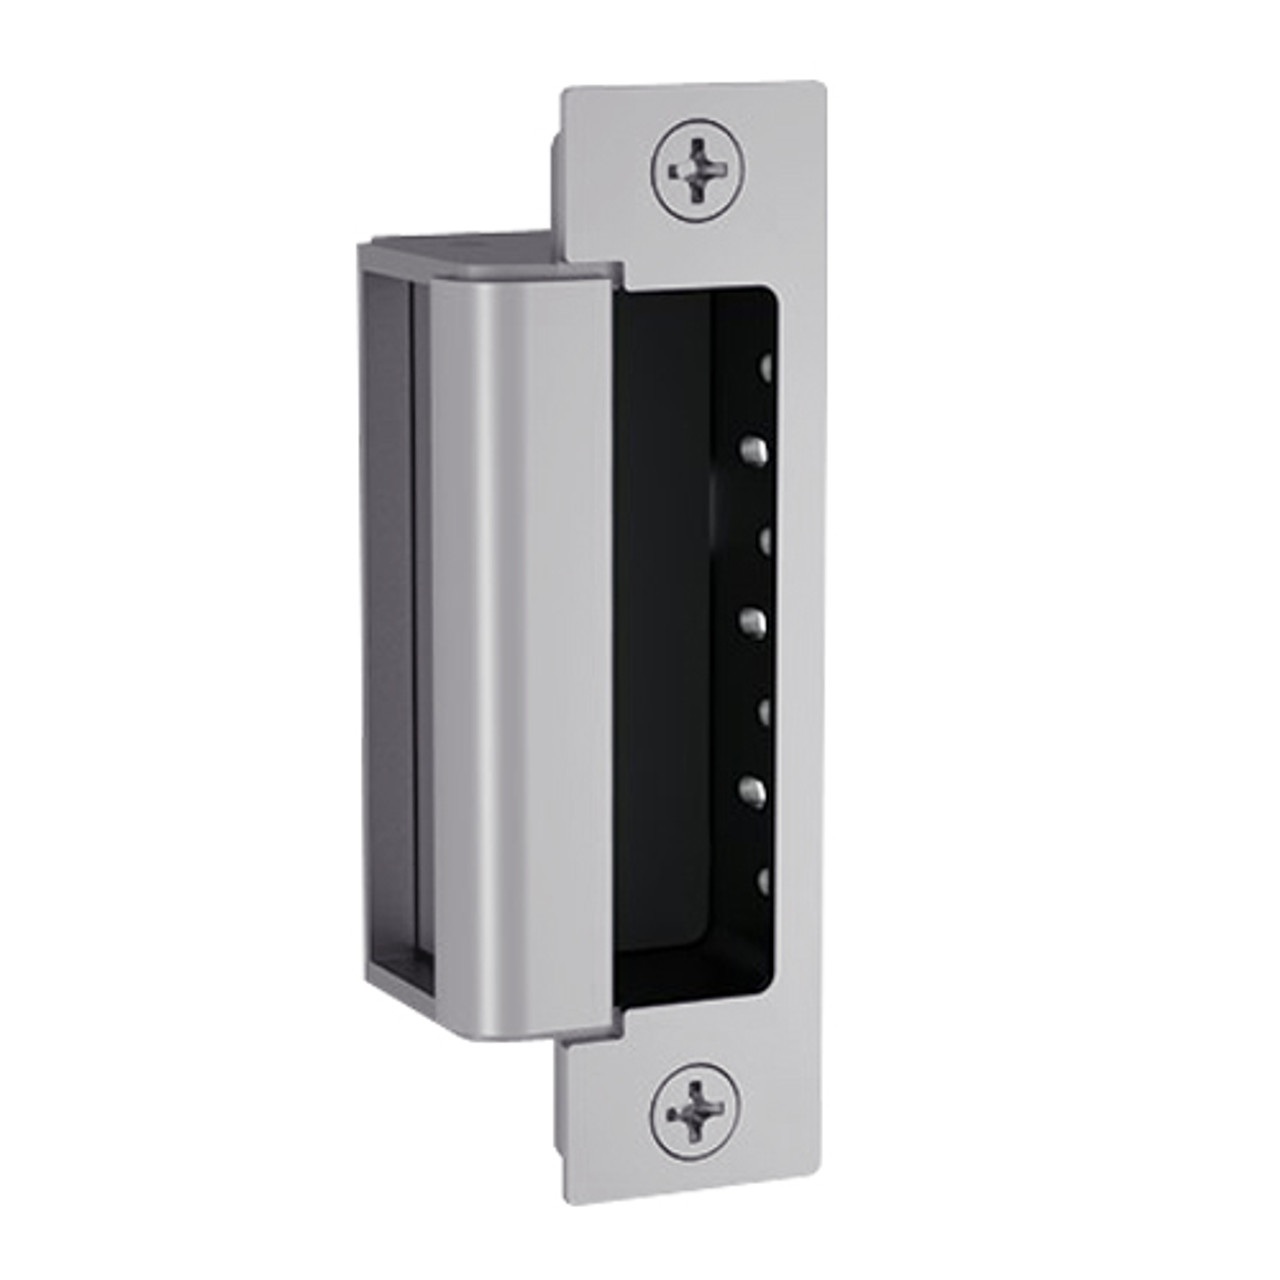 1600-DLM-630 Hes 1600 Series Dynamic Low Profile Electric Strike Bodies with Dual Lock Monitor in Satin Stainless Steel